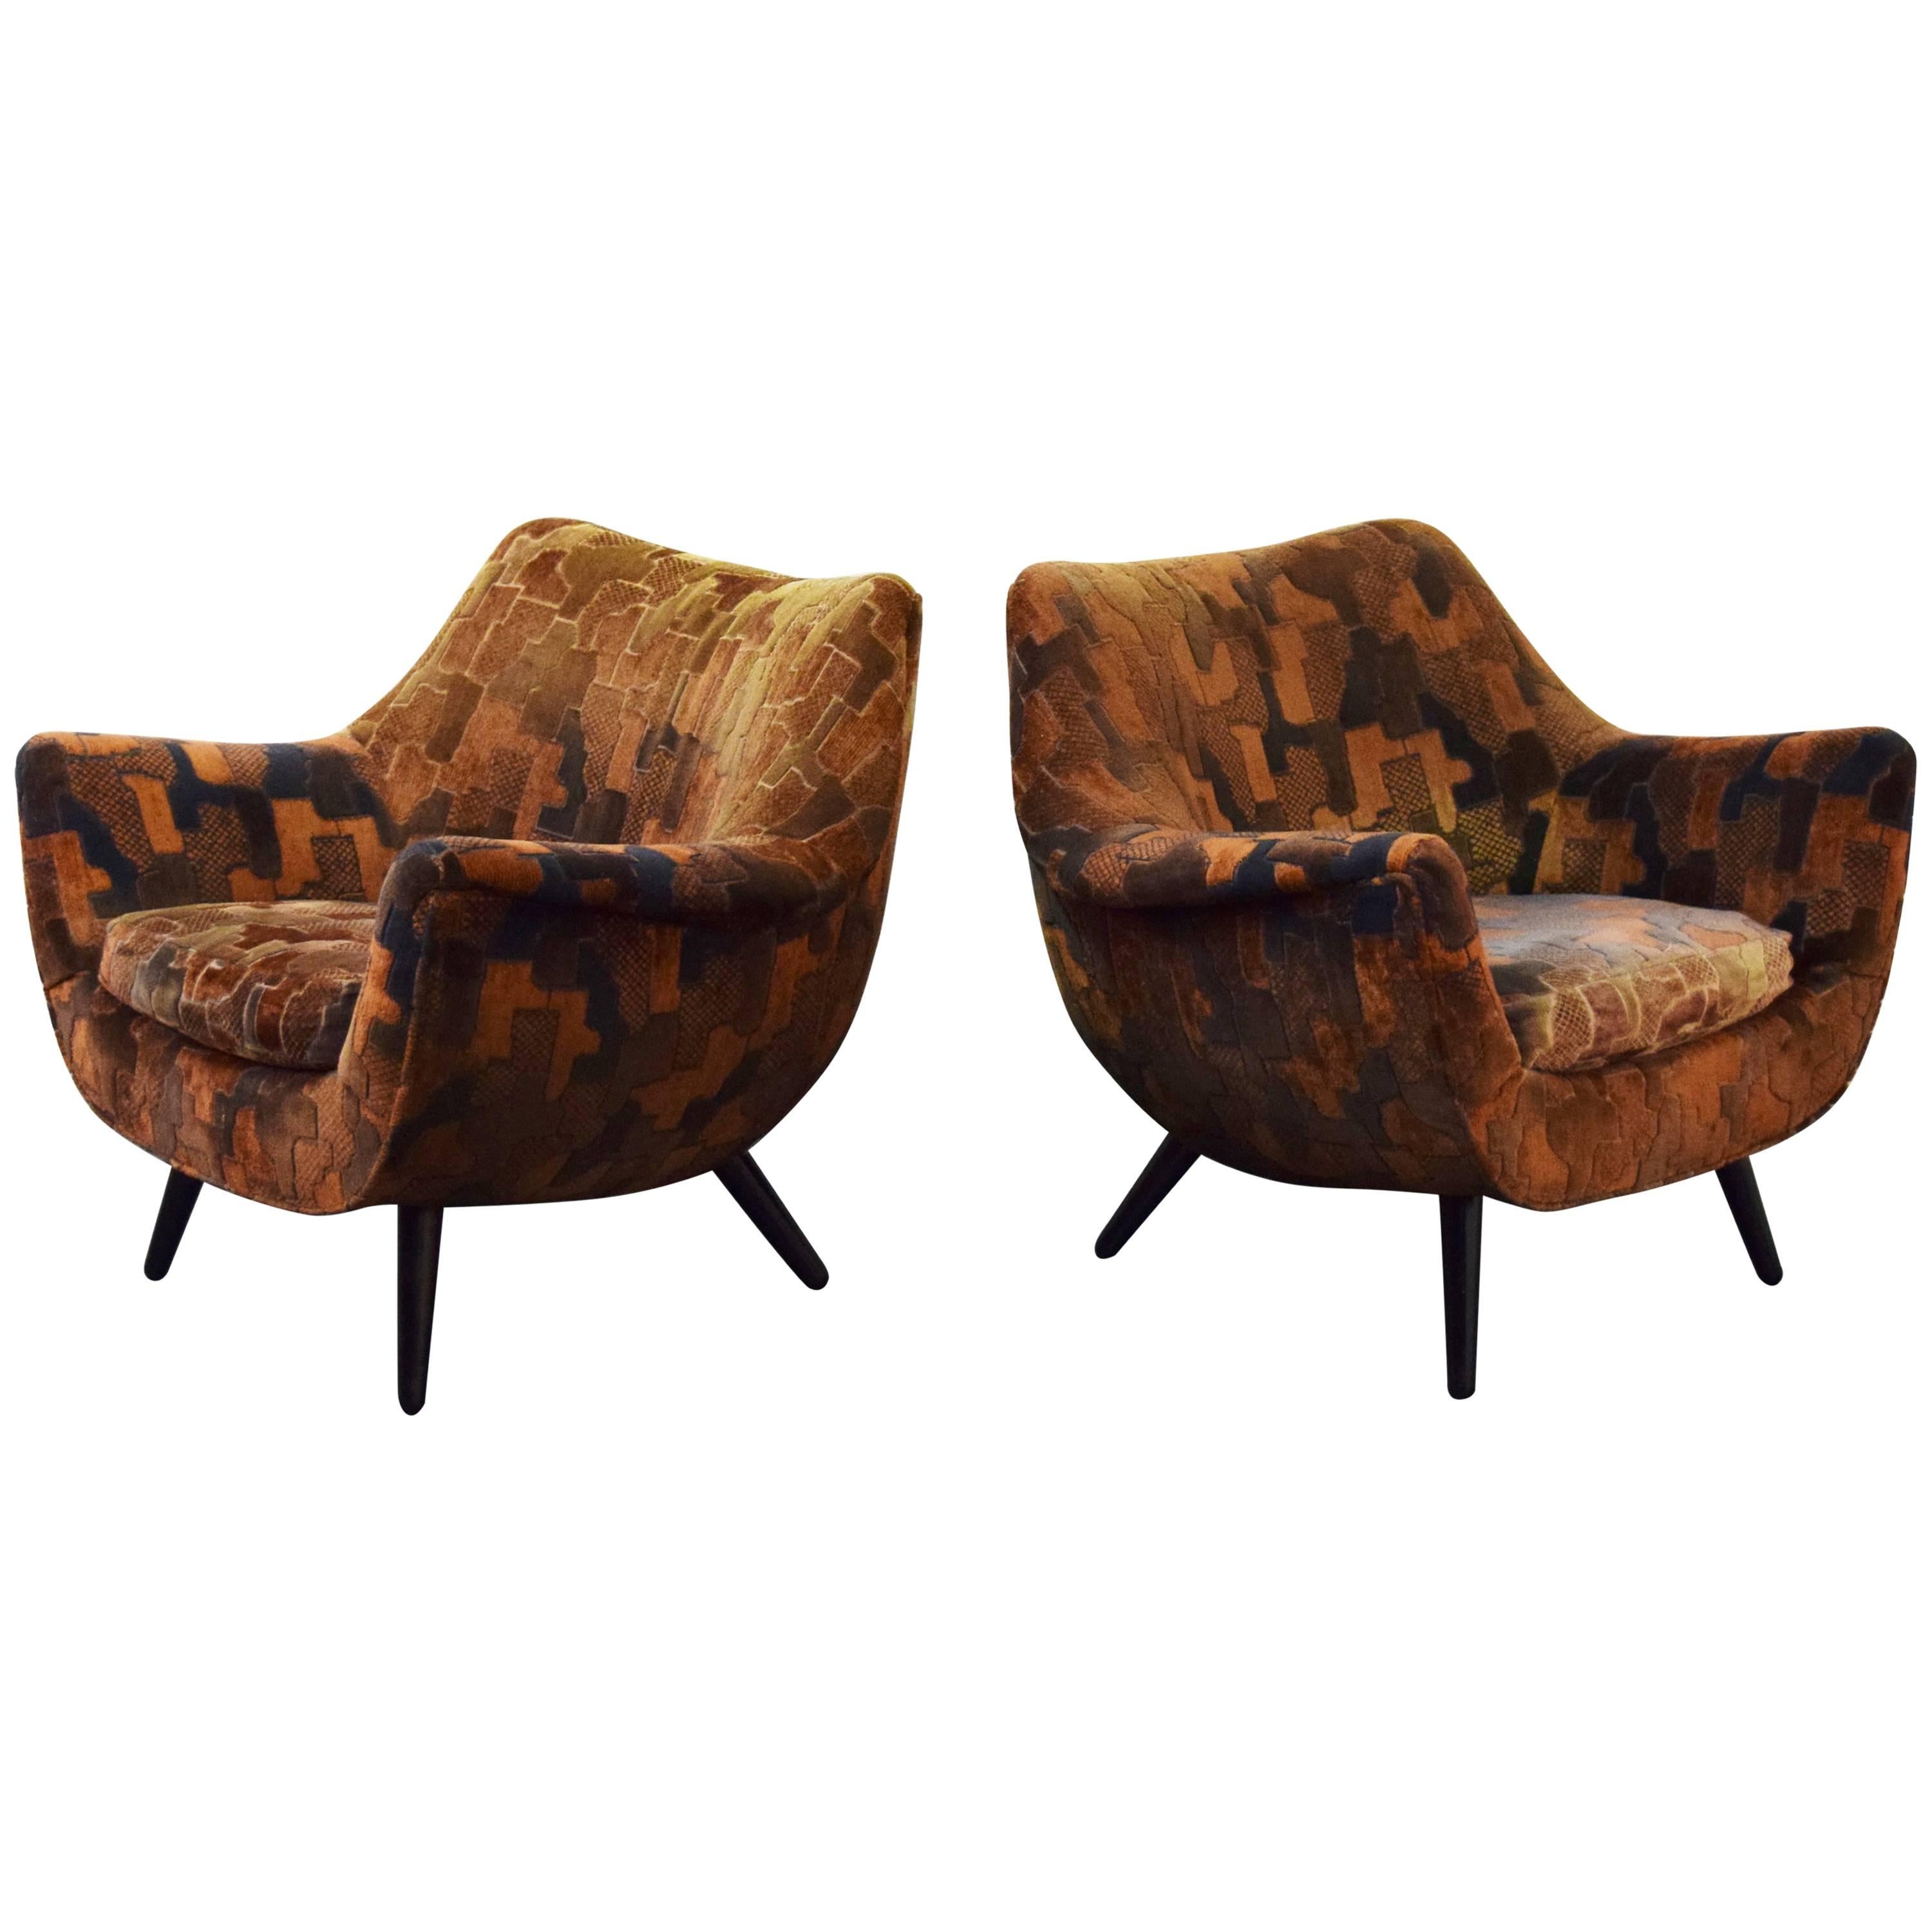 Pair of Sculptural Lawrence Peabody Lounge Chairs